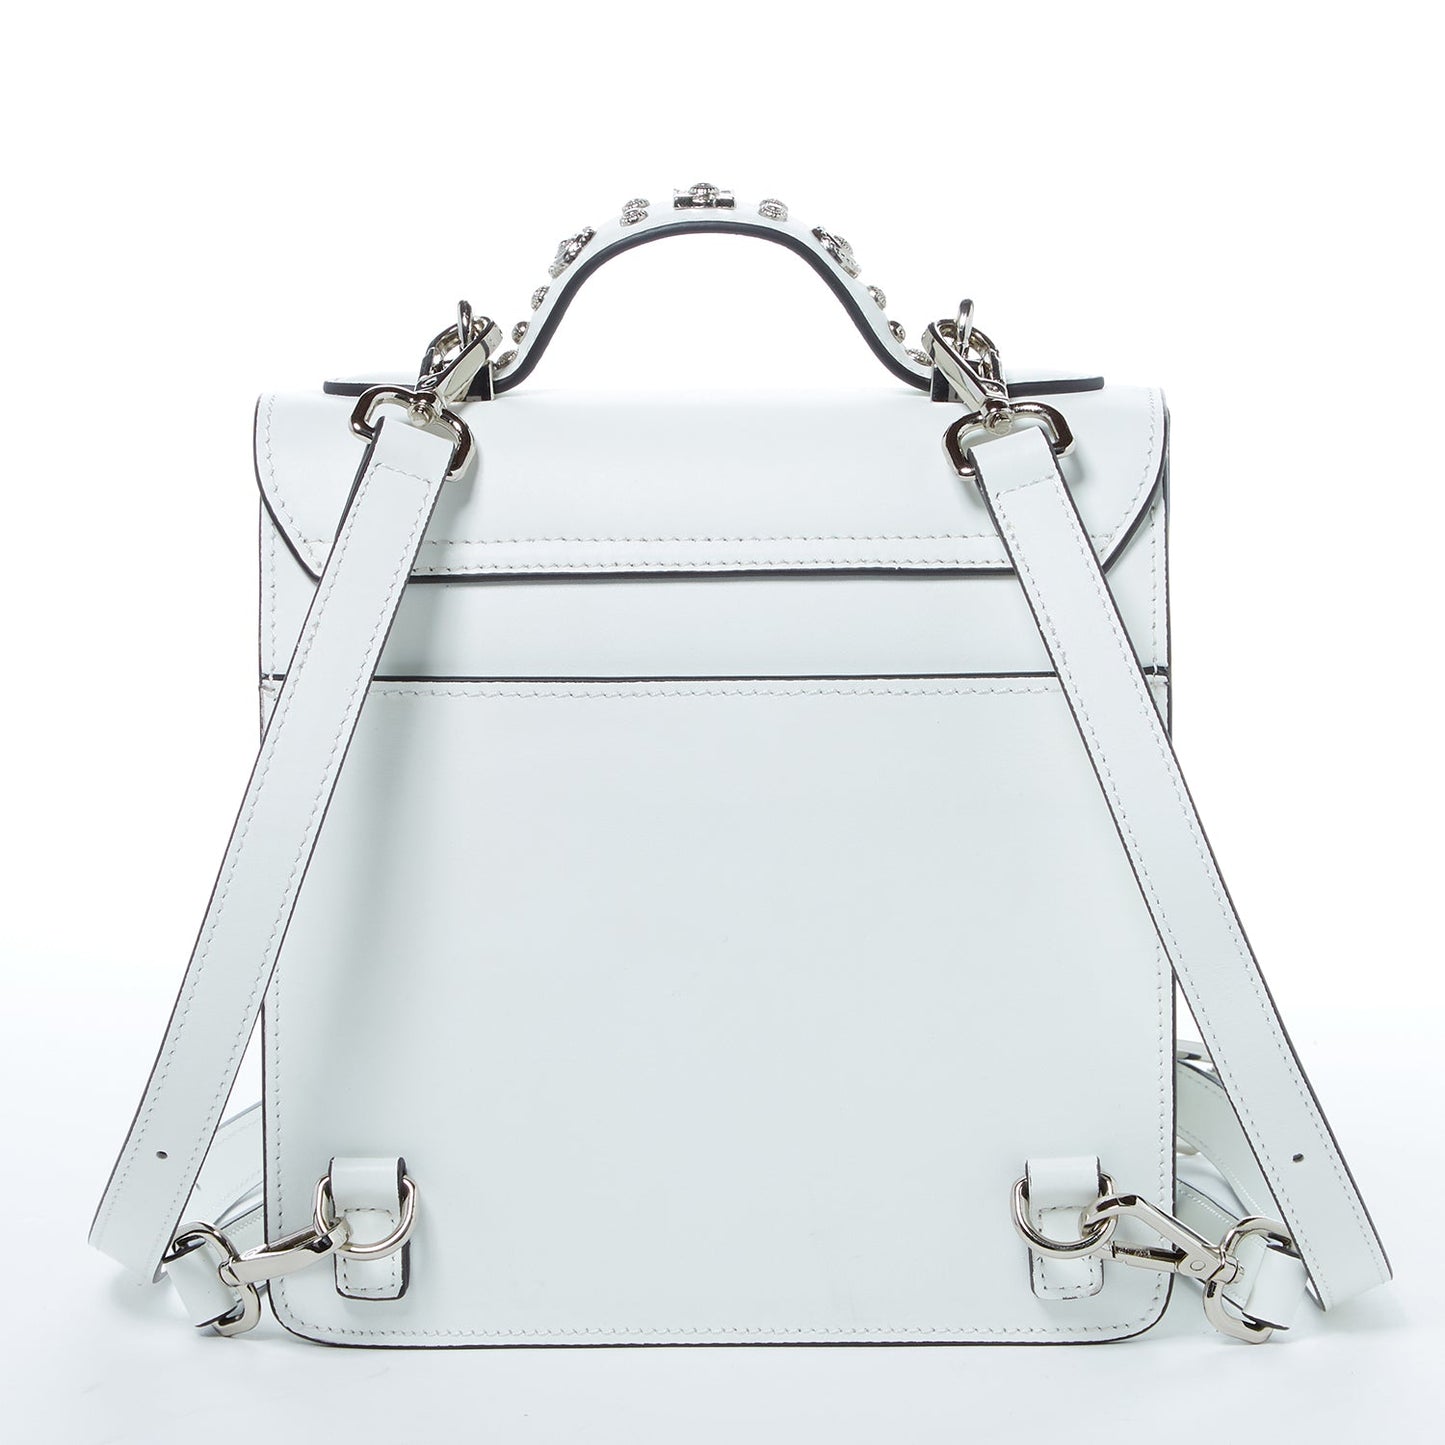 The Hollywood Backpack Leather Purse White-5